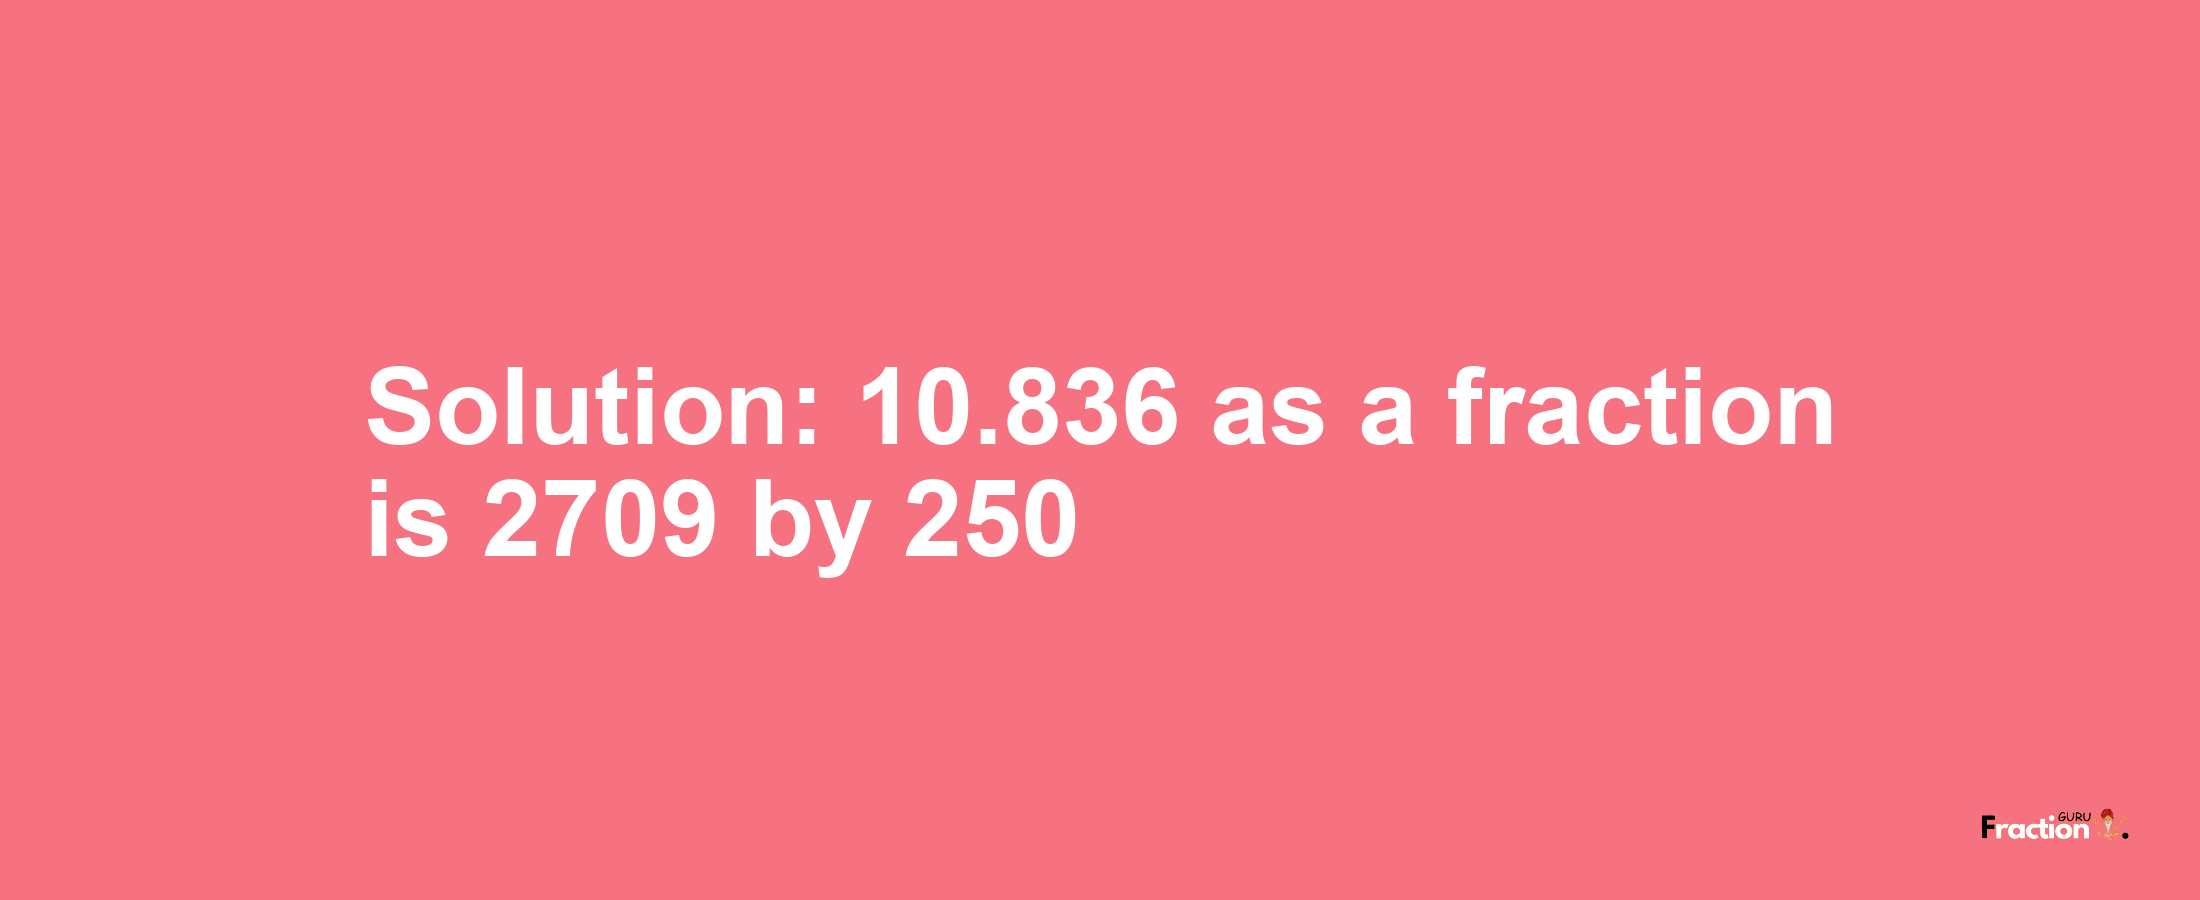 Solution:10.836 as a fraction is 2709/250